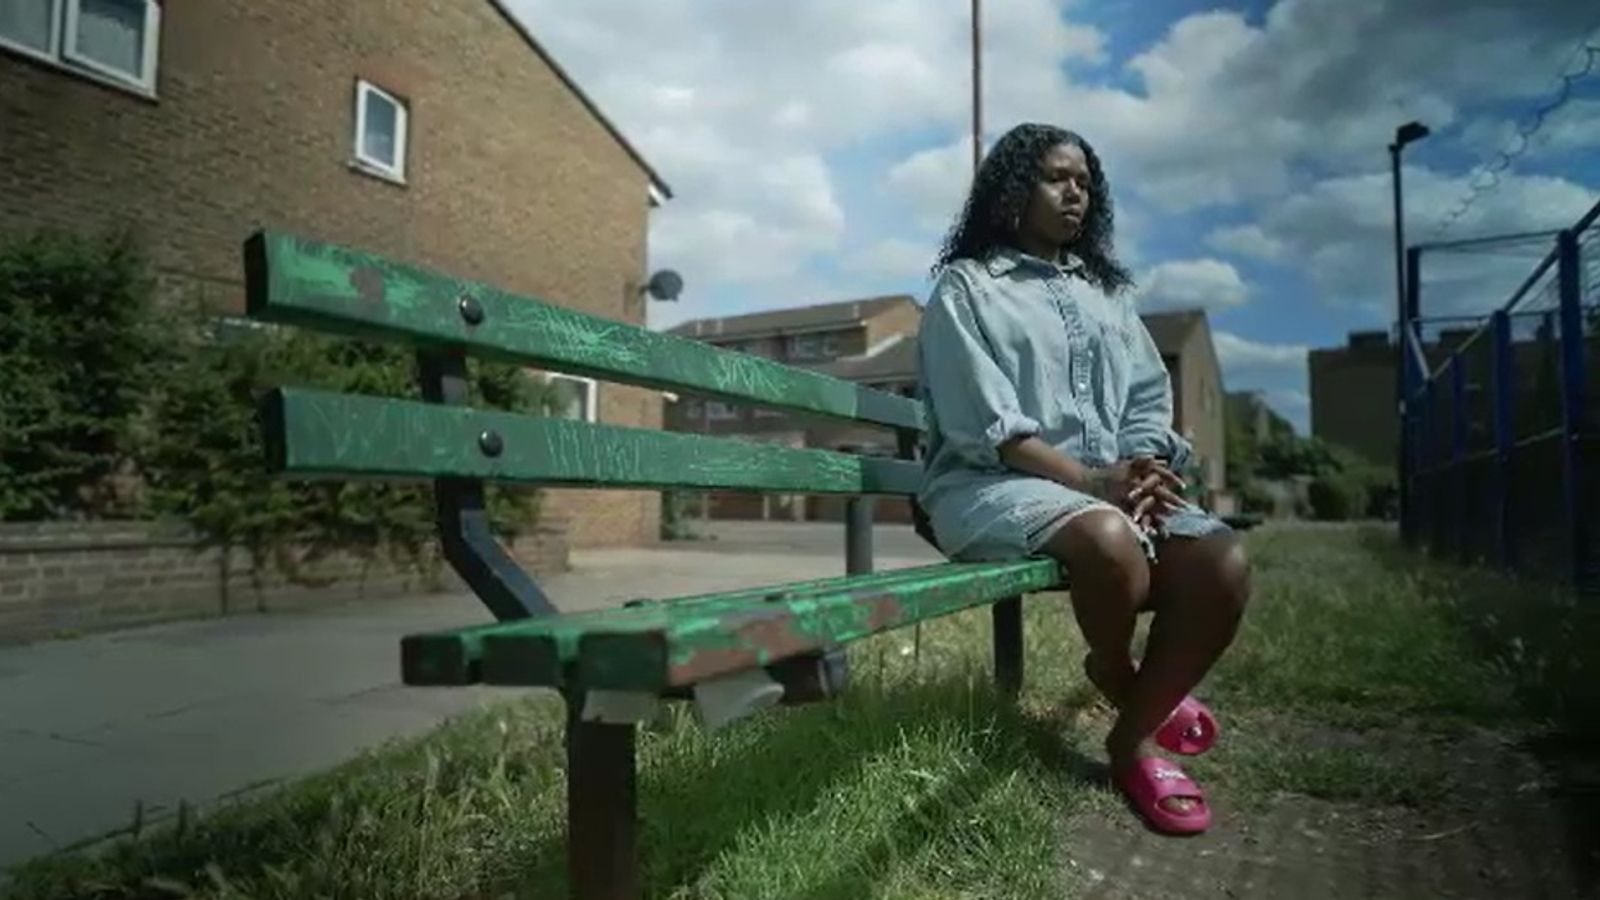 At risk, vulnerable and invisible: The thousands of girls in England exploited within gangs   